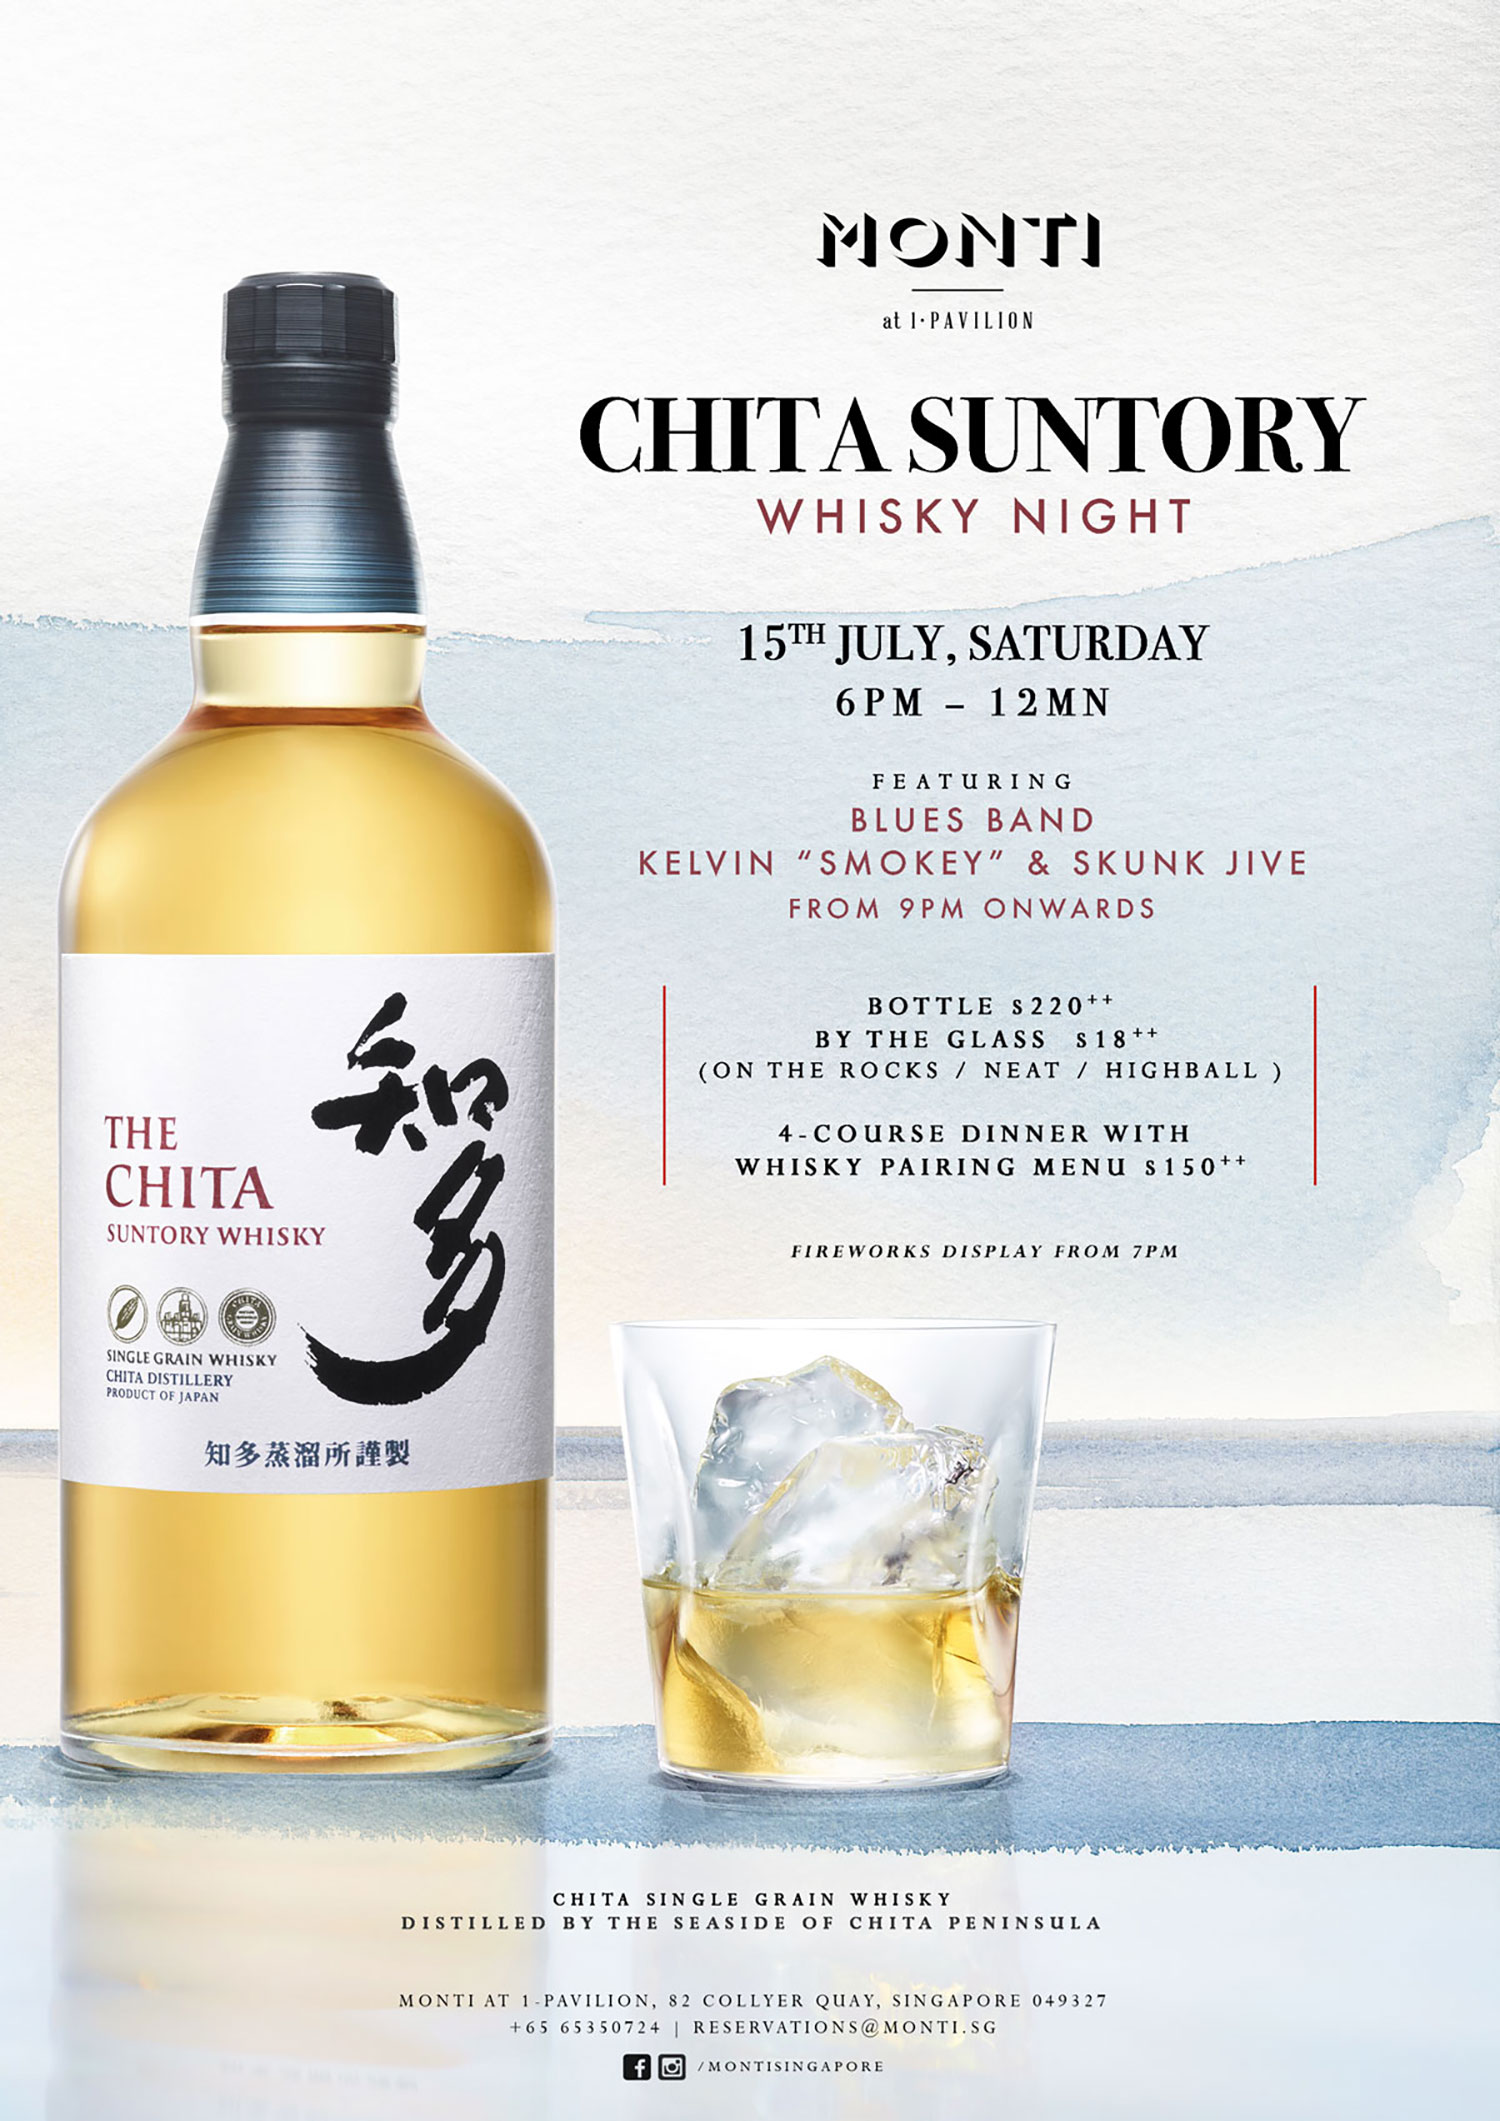 Japanese Nights at Monti with The Chita Suntory Whisky